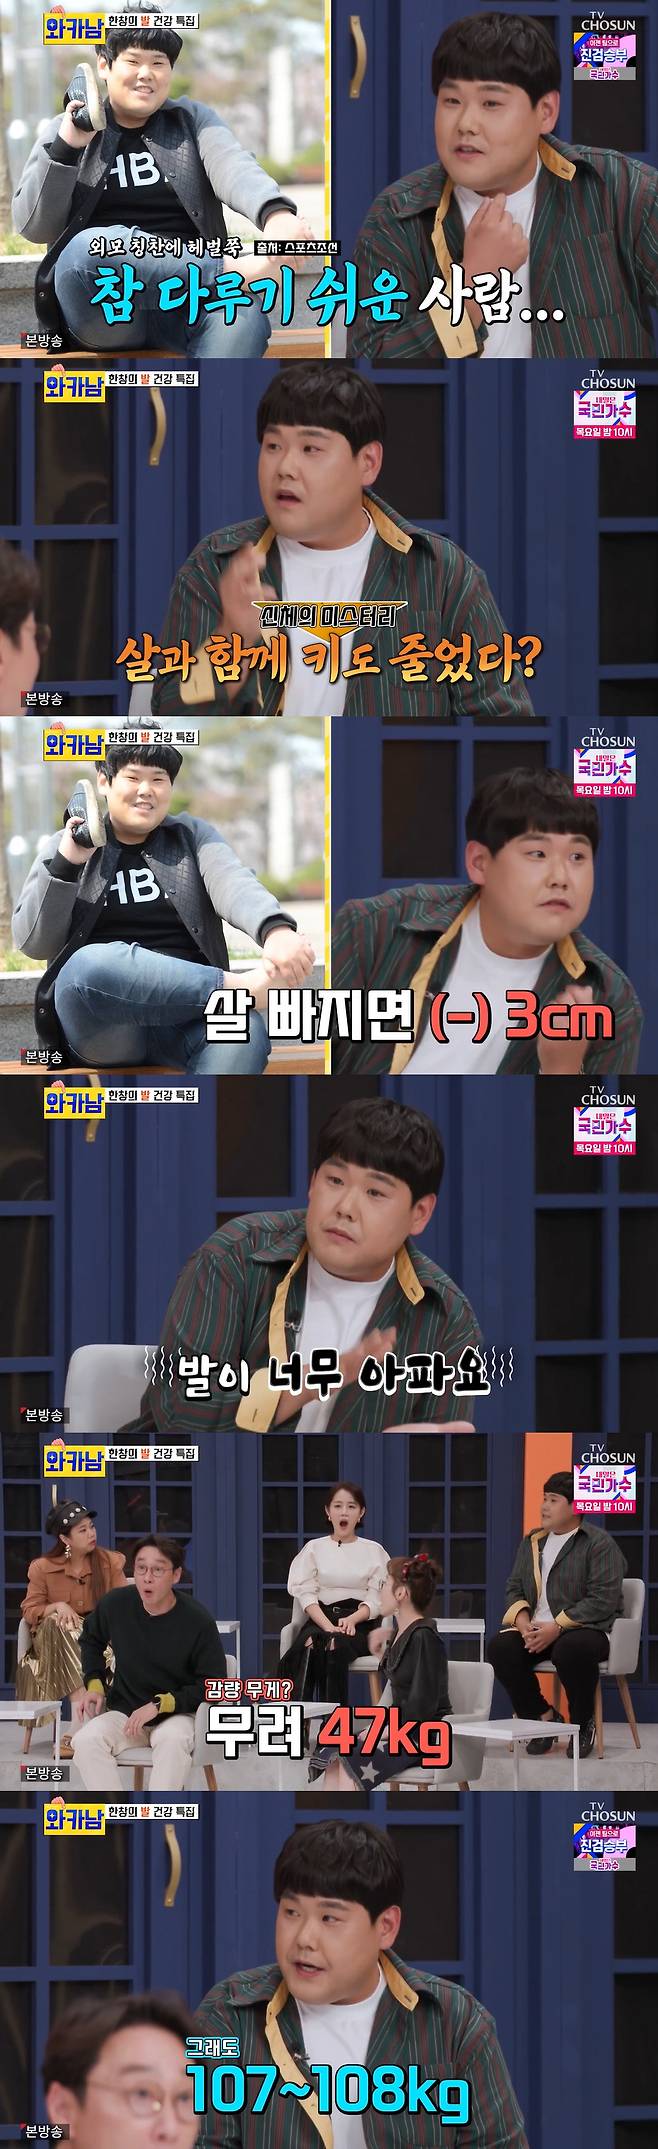 The comedian Kim Soo-young said he is maintaining after a 47kg weight loss.On the 26th, TV Chosuns Man Who Wide Cards (hereinafter referred to as Wakanam) featured a foot health feature in full swing.Kim Soo-young said, I lost 3cm in height when I fell. When I was fat, I increased 3cm and fell 3cm.Its because I lost my foot, he said. So every time I walk, my feet are so sick.Other cast members asked, How much weight did you lose? And Kim Soo-young was surprised to say, I lost 47kg weight.In particular, Park said, I have escaped from my body.Kim Soo-young also said, Now I go 107 ~ 108kg.